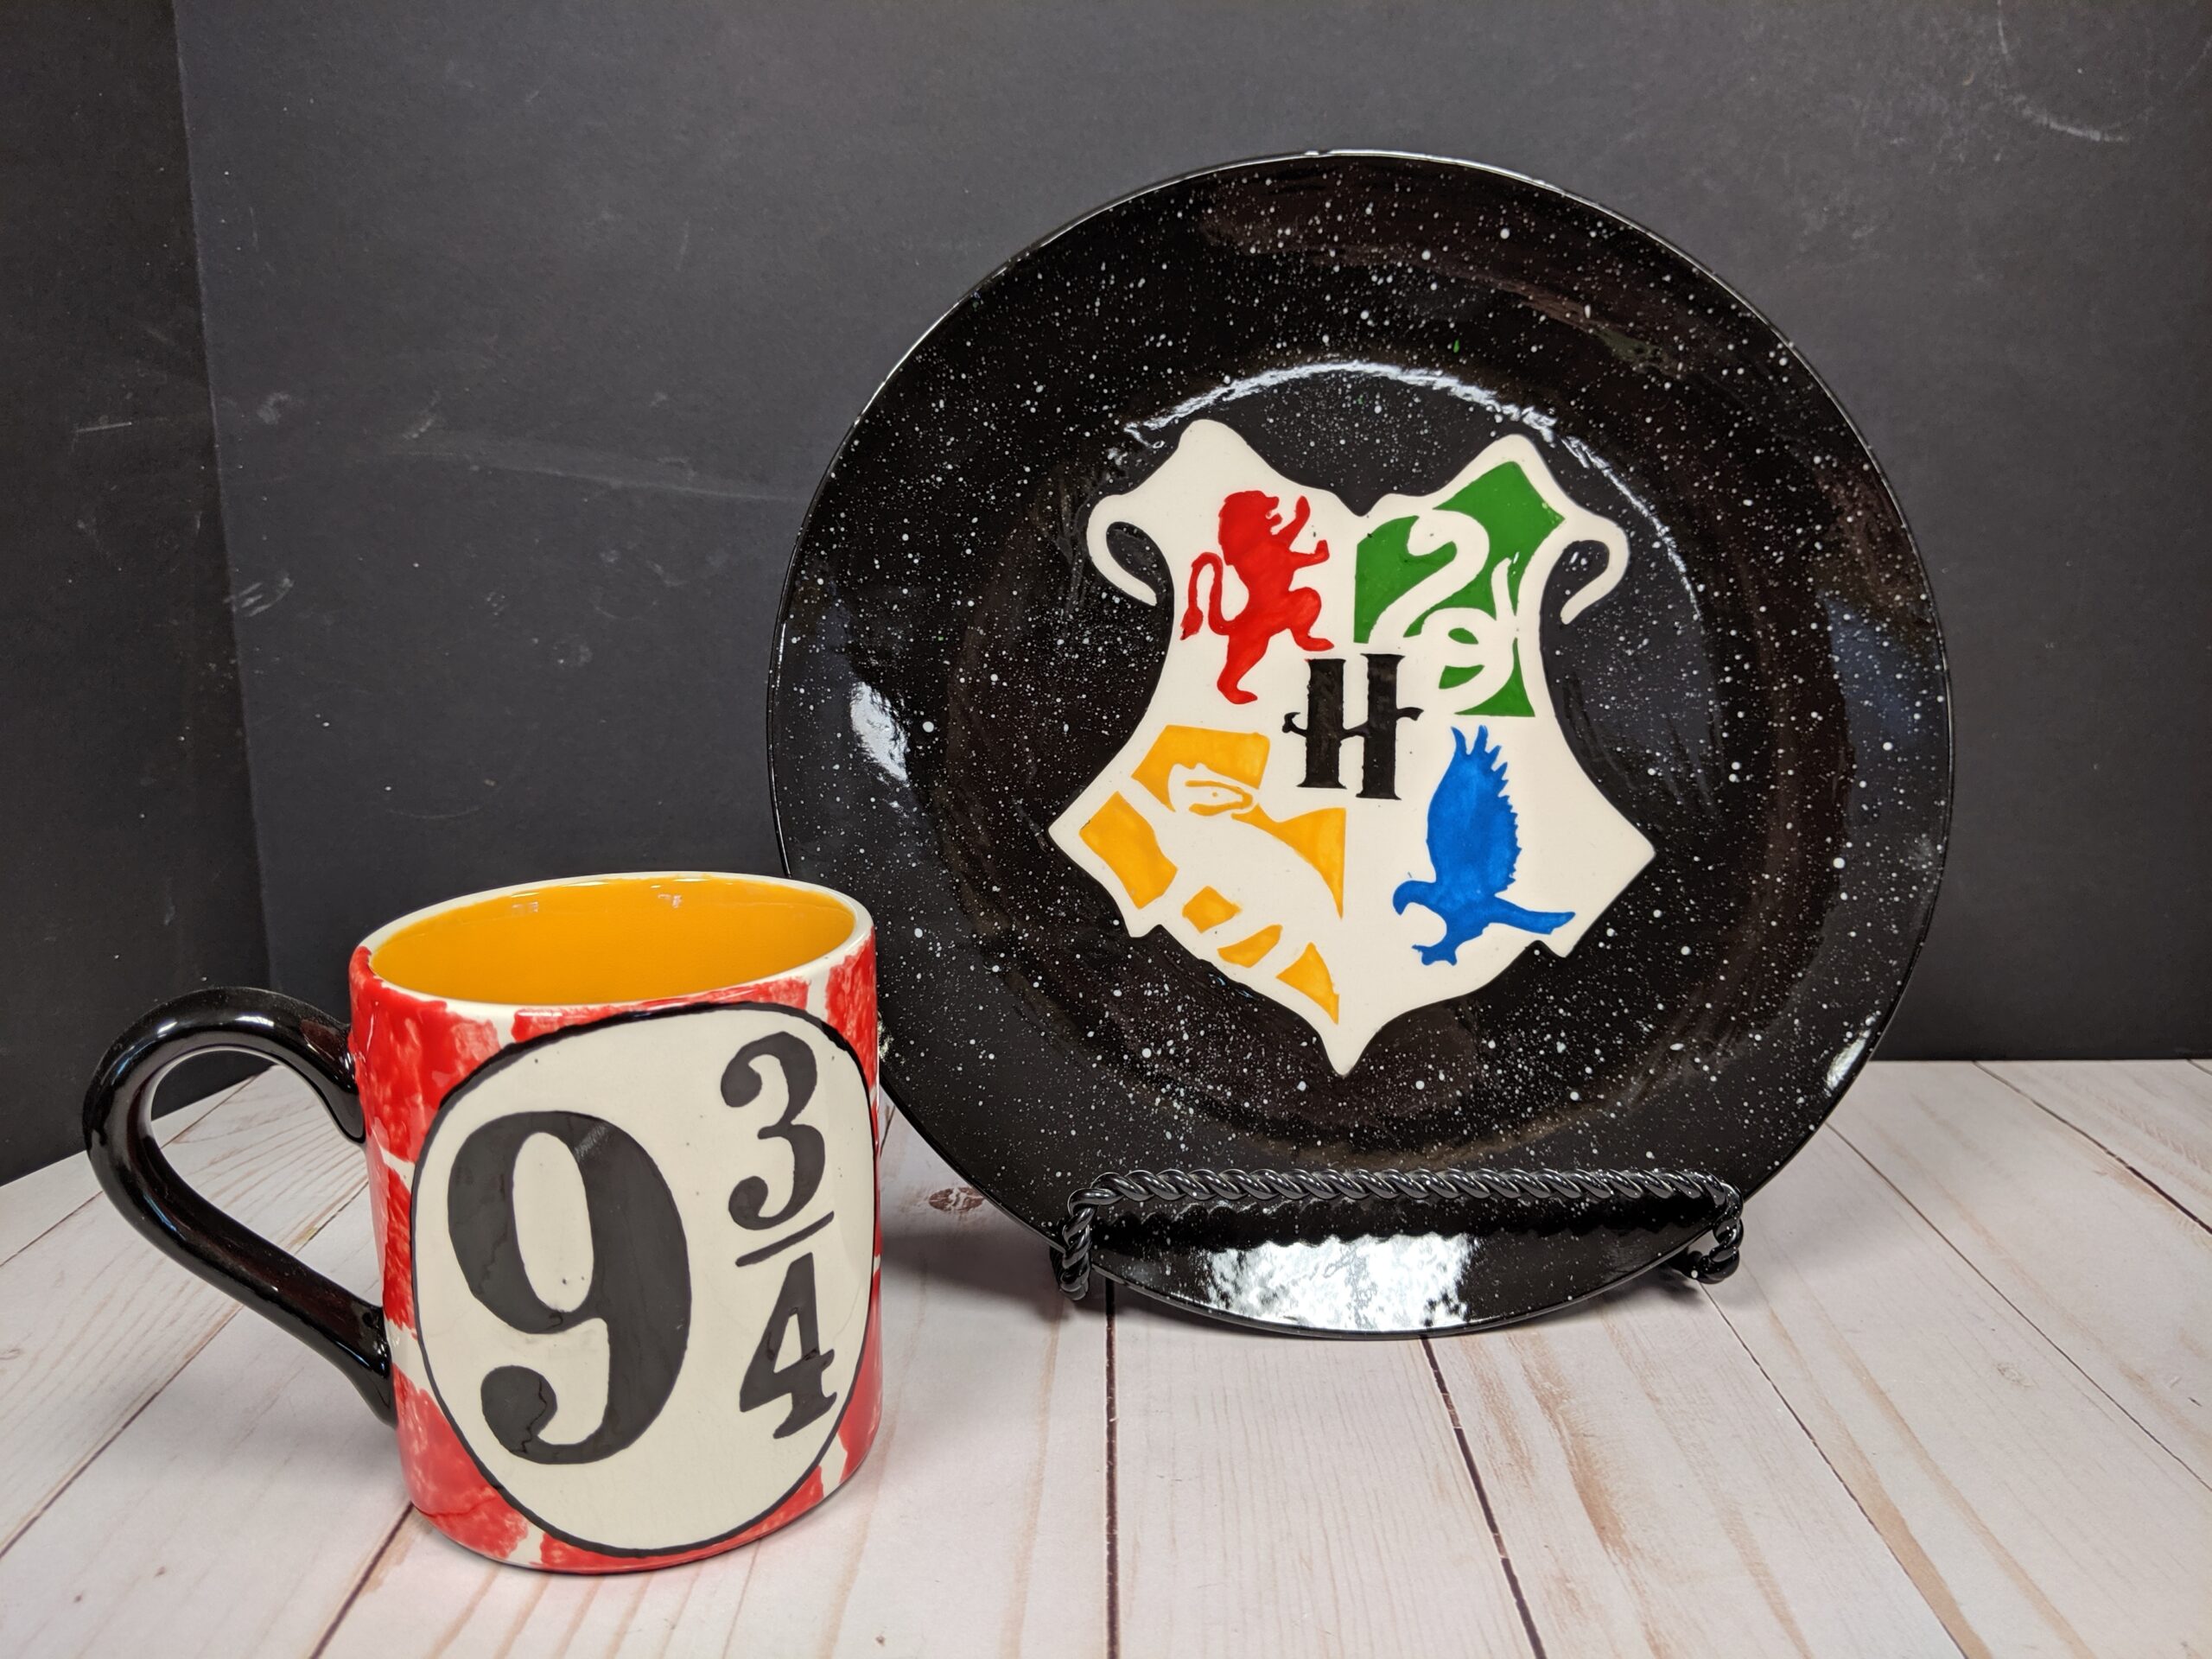 A plate and mug with the hogwarts house colors on them.